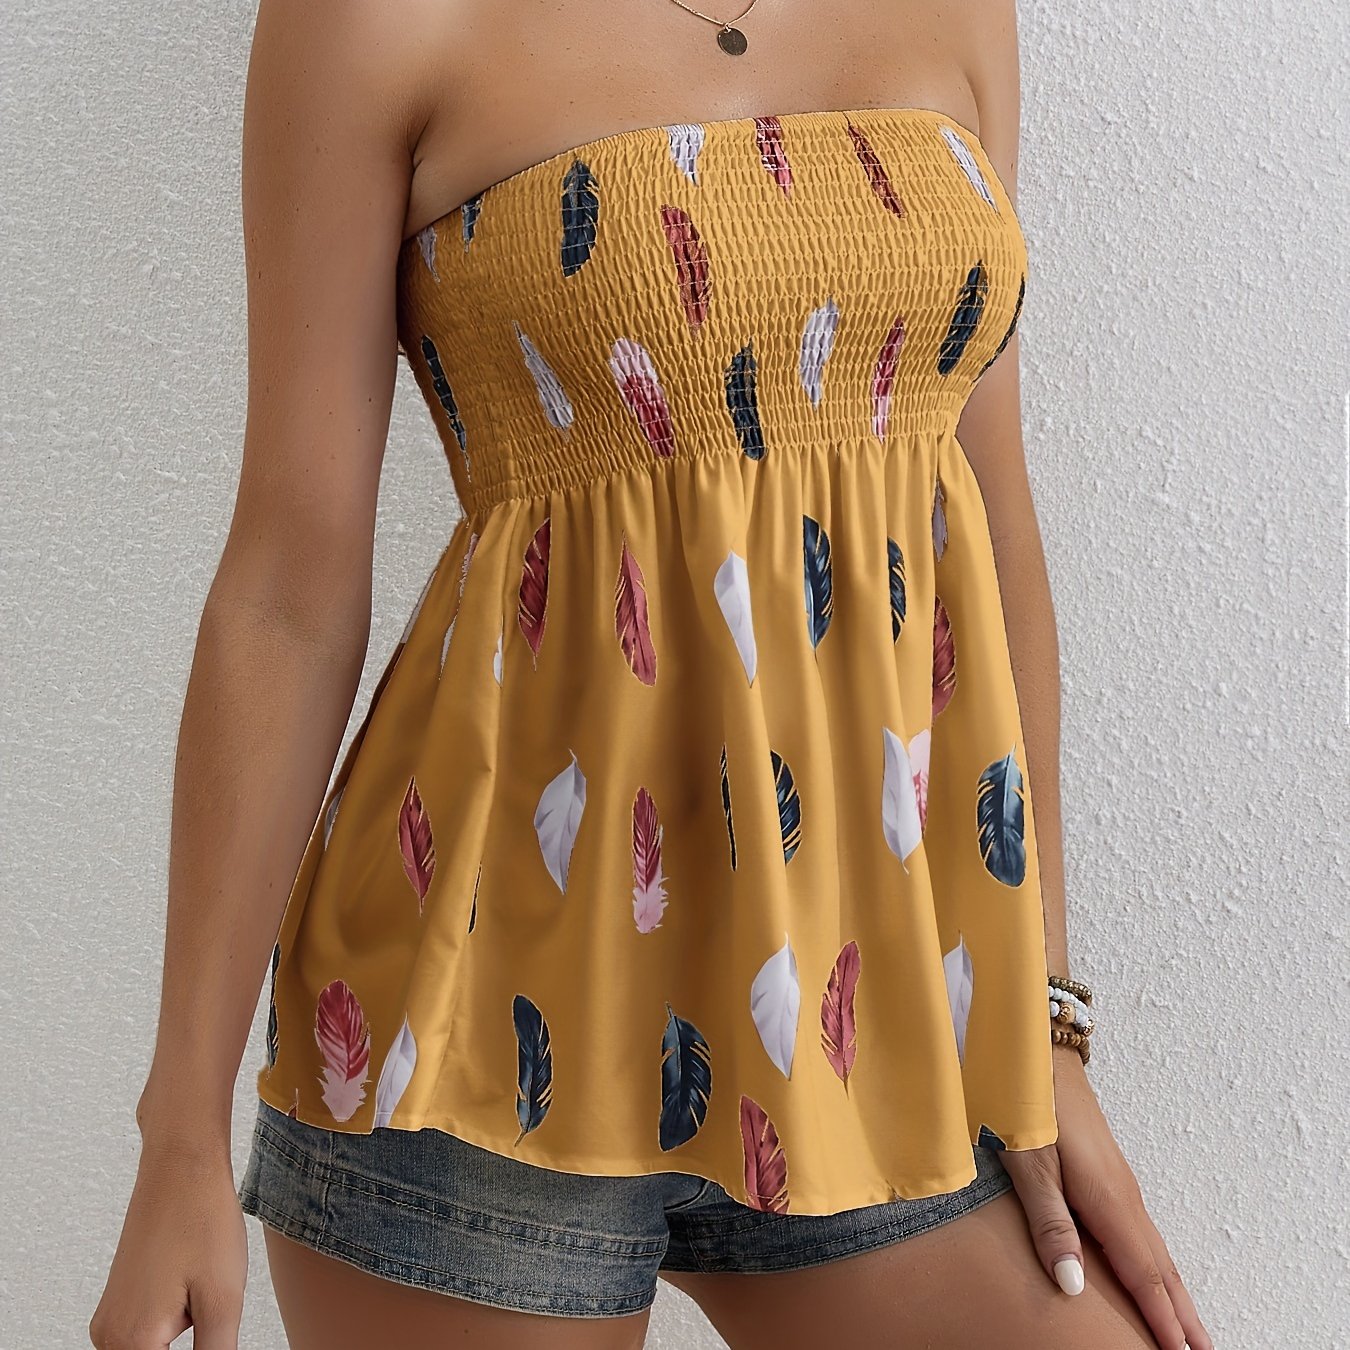 Antmvs  Feather Print Shirred Flared Tube Top, Resort Wear Sleeveless Top For Summer, Women's Clothing